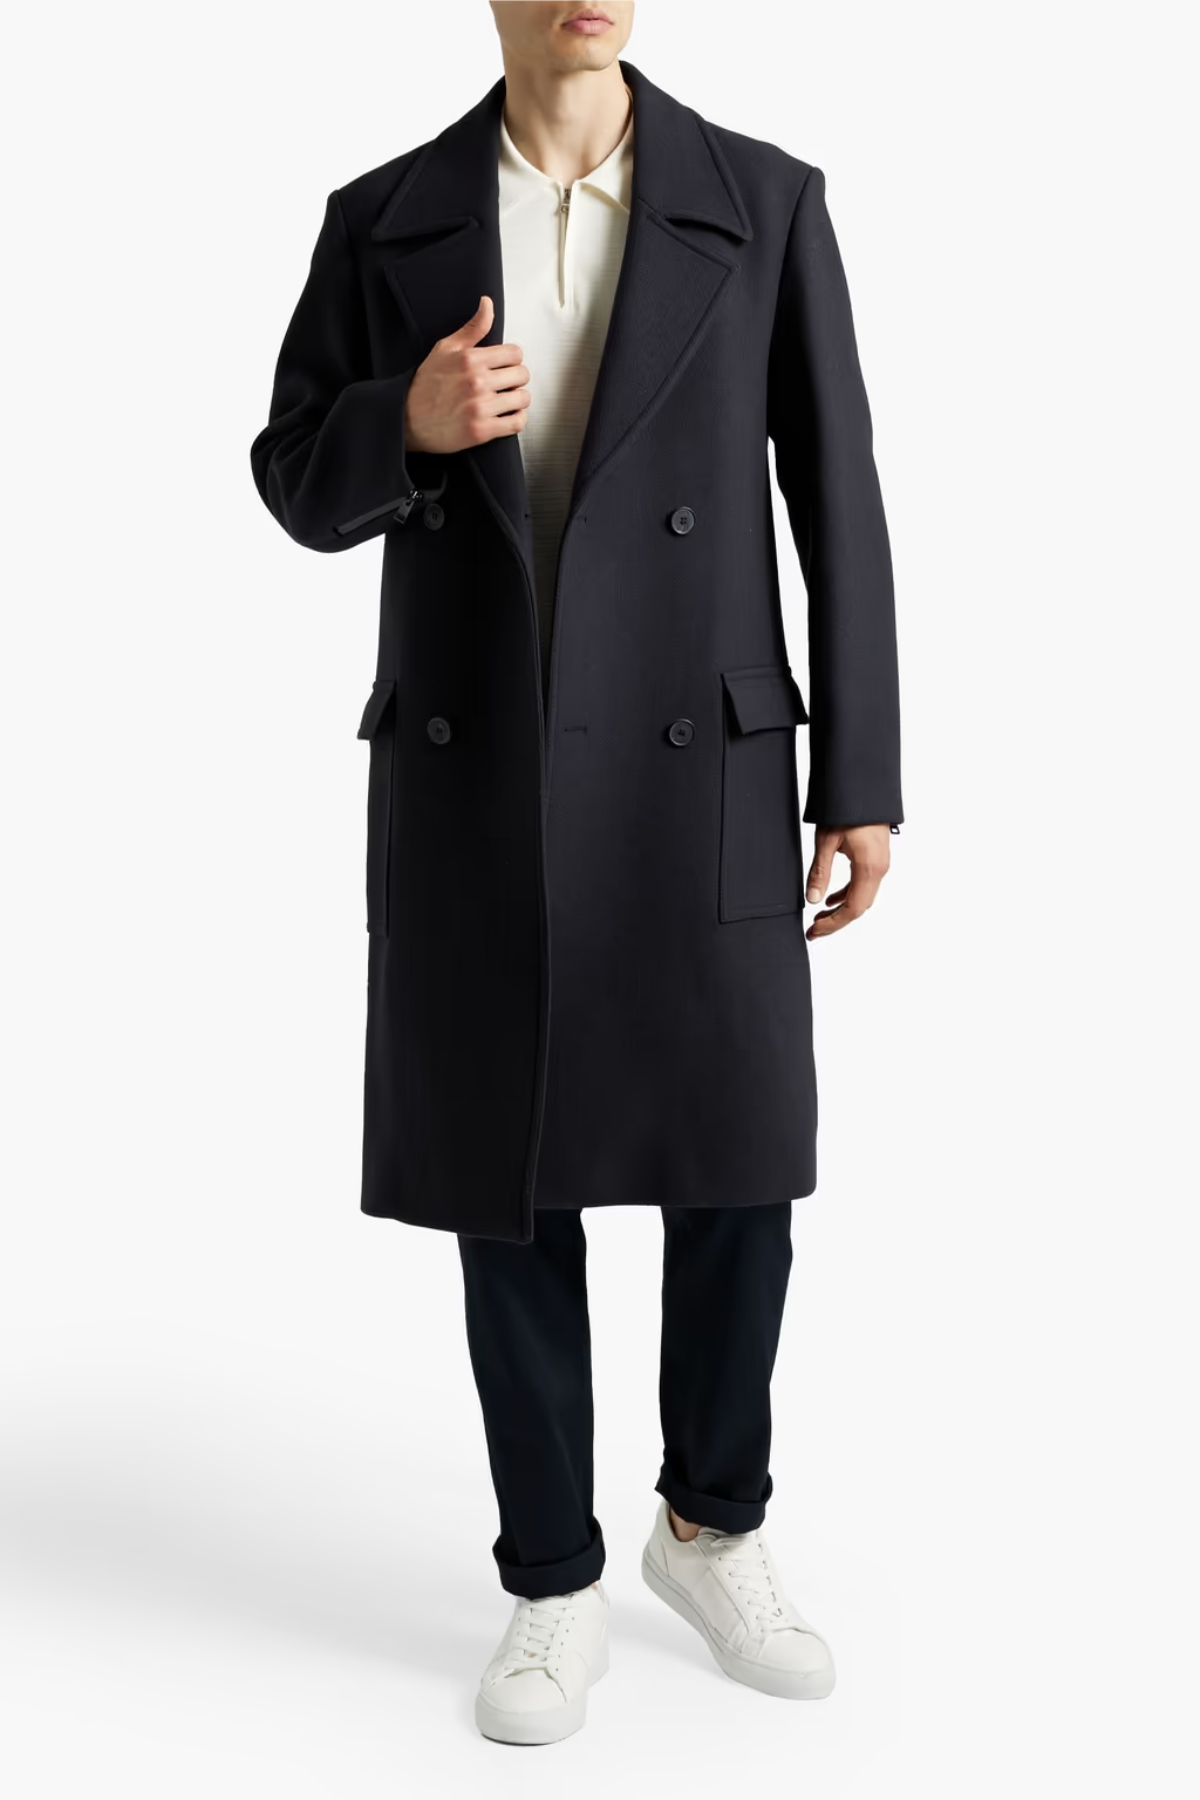 FRAME DOUBLE BREASTED COAT RENTAL